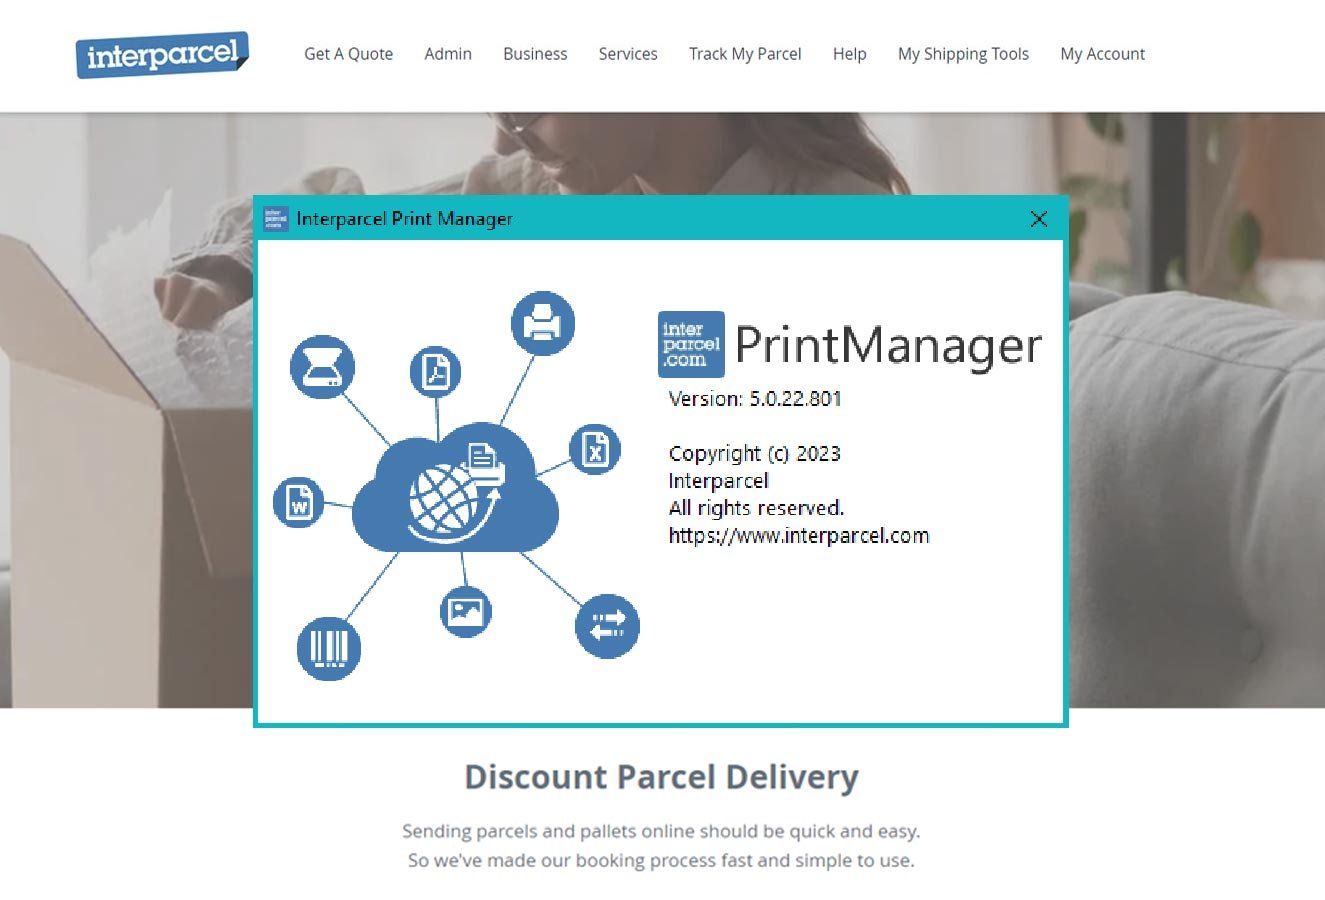 Interparcel Print Manager